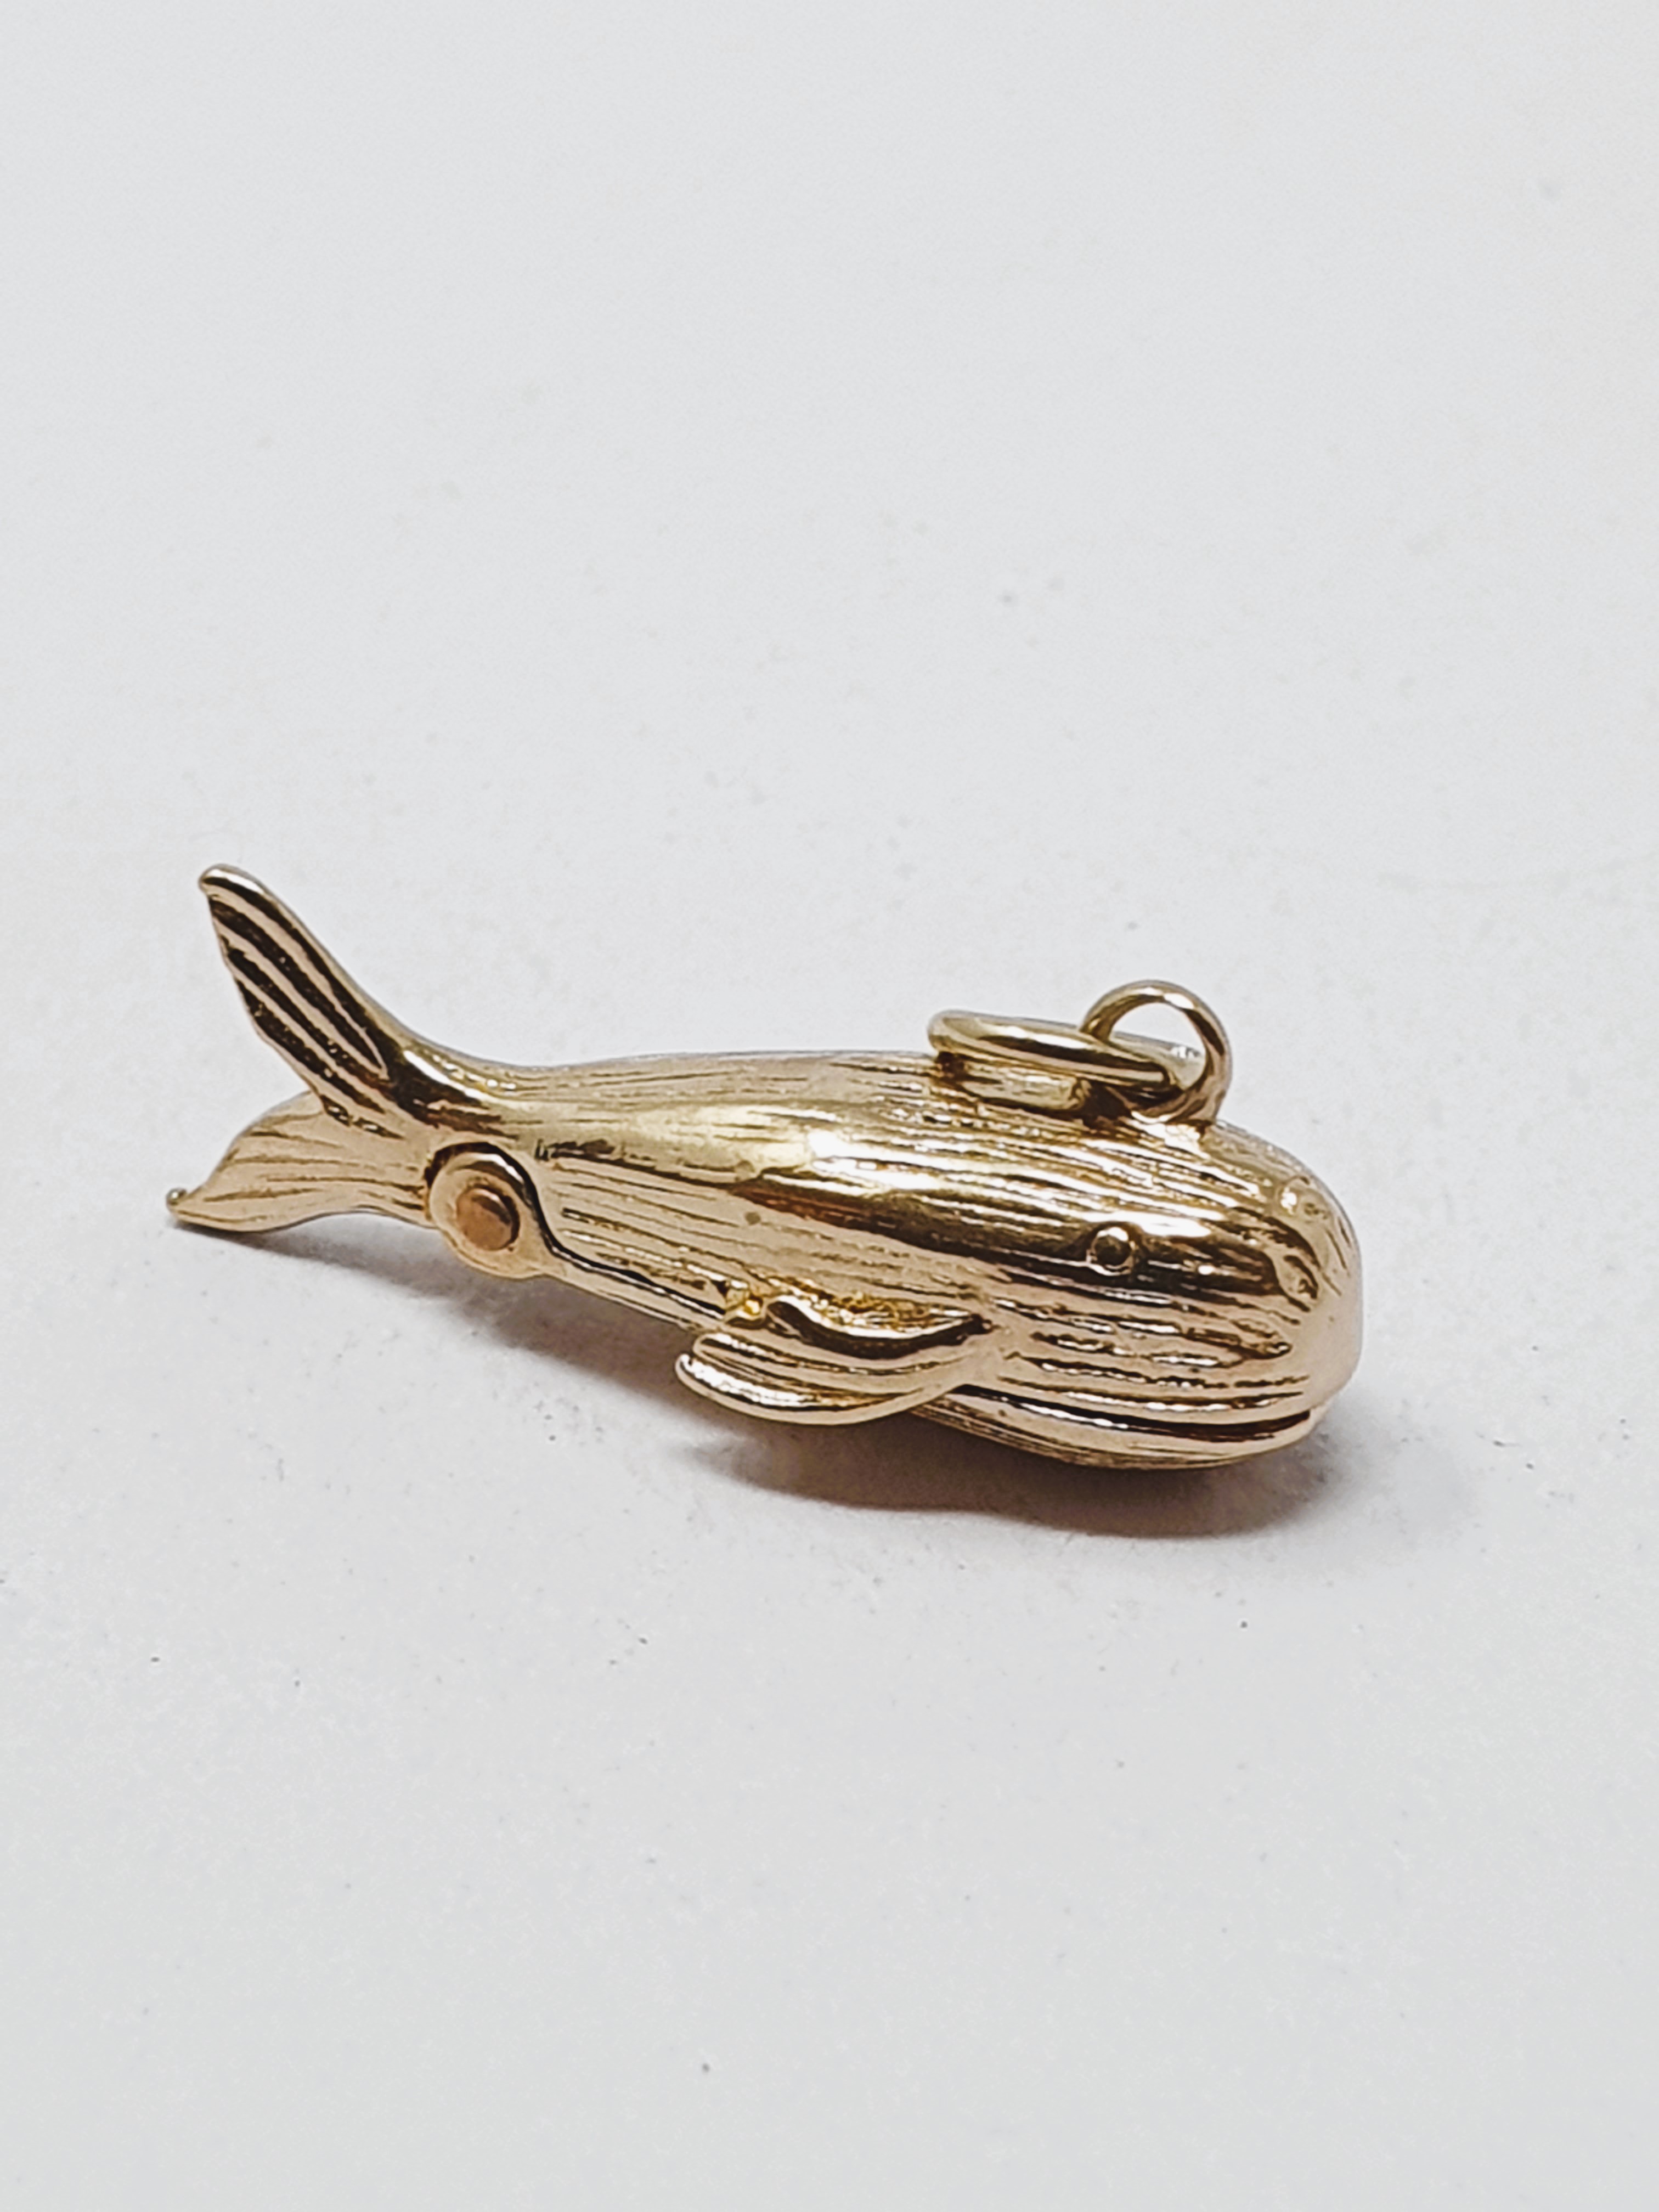 9ct gold vintage Jonah in whale charm, gross weight 2.